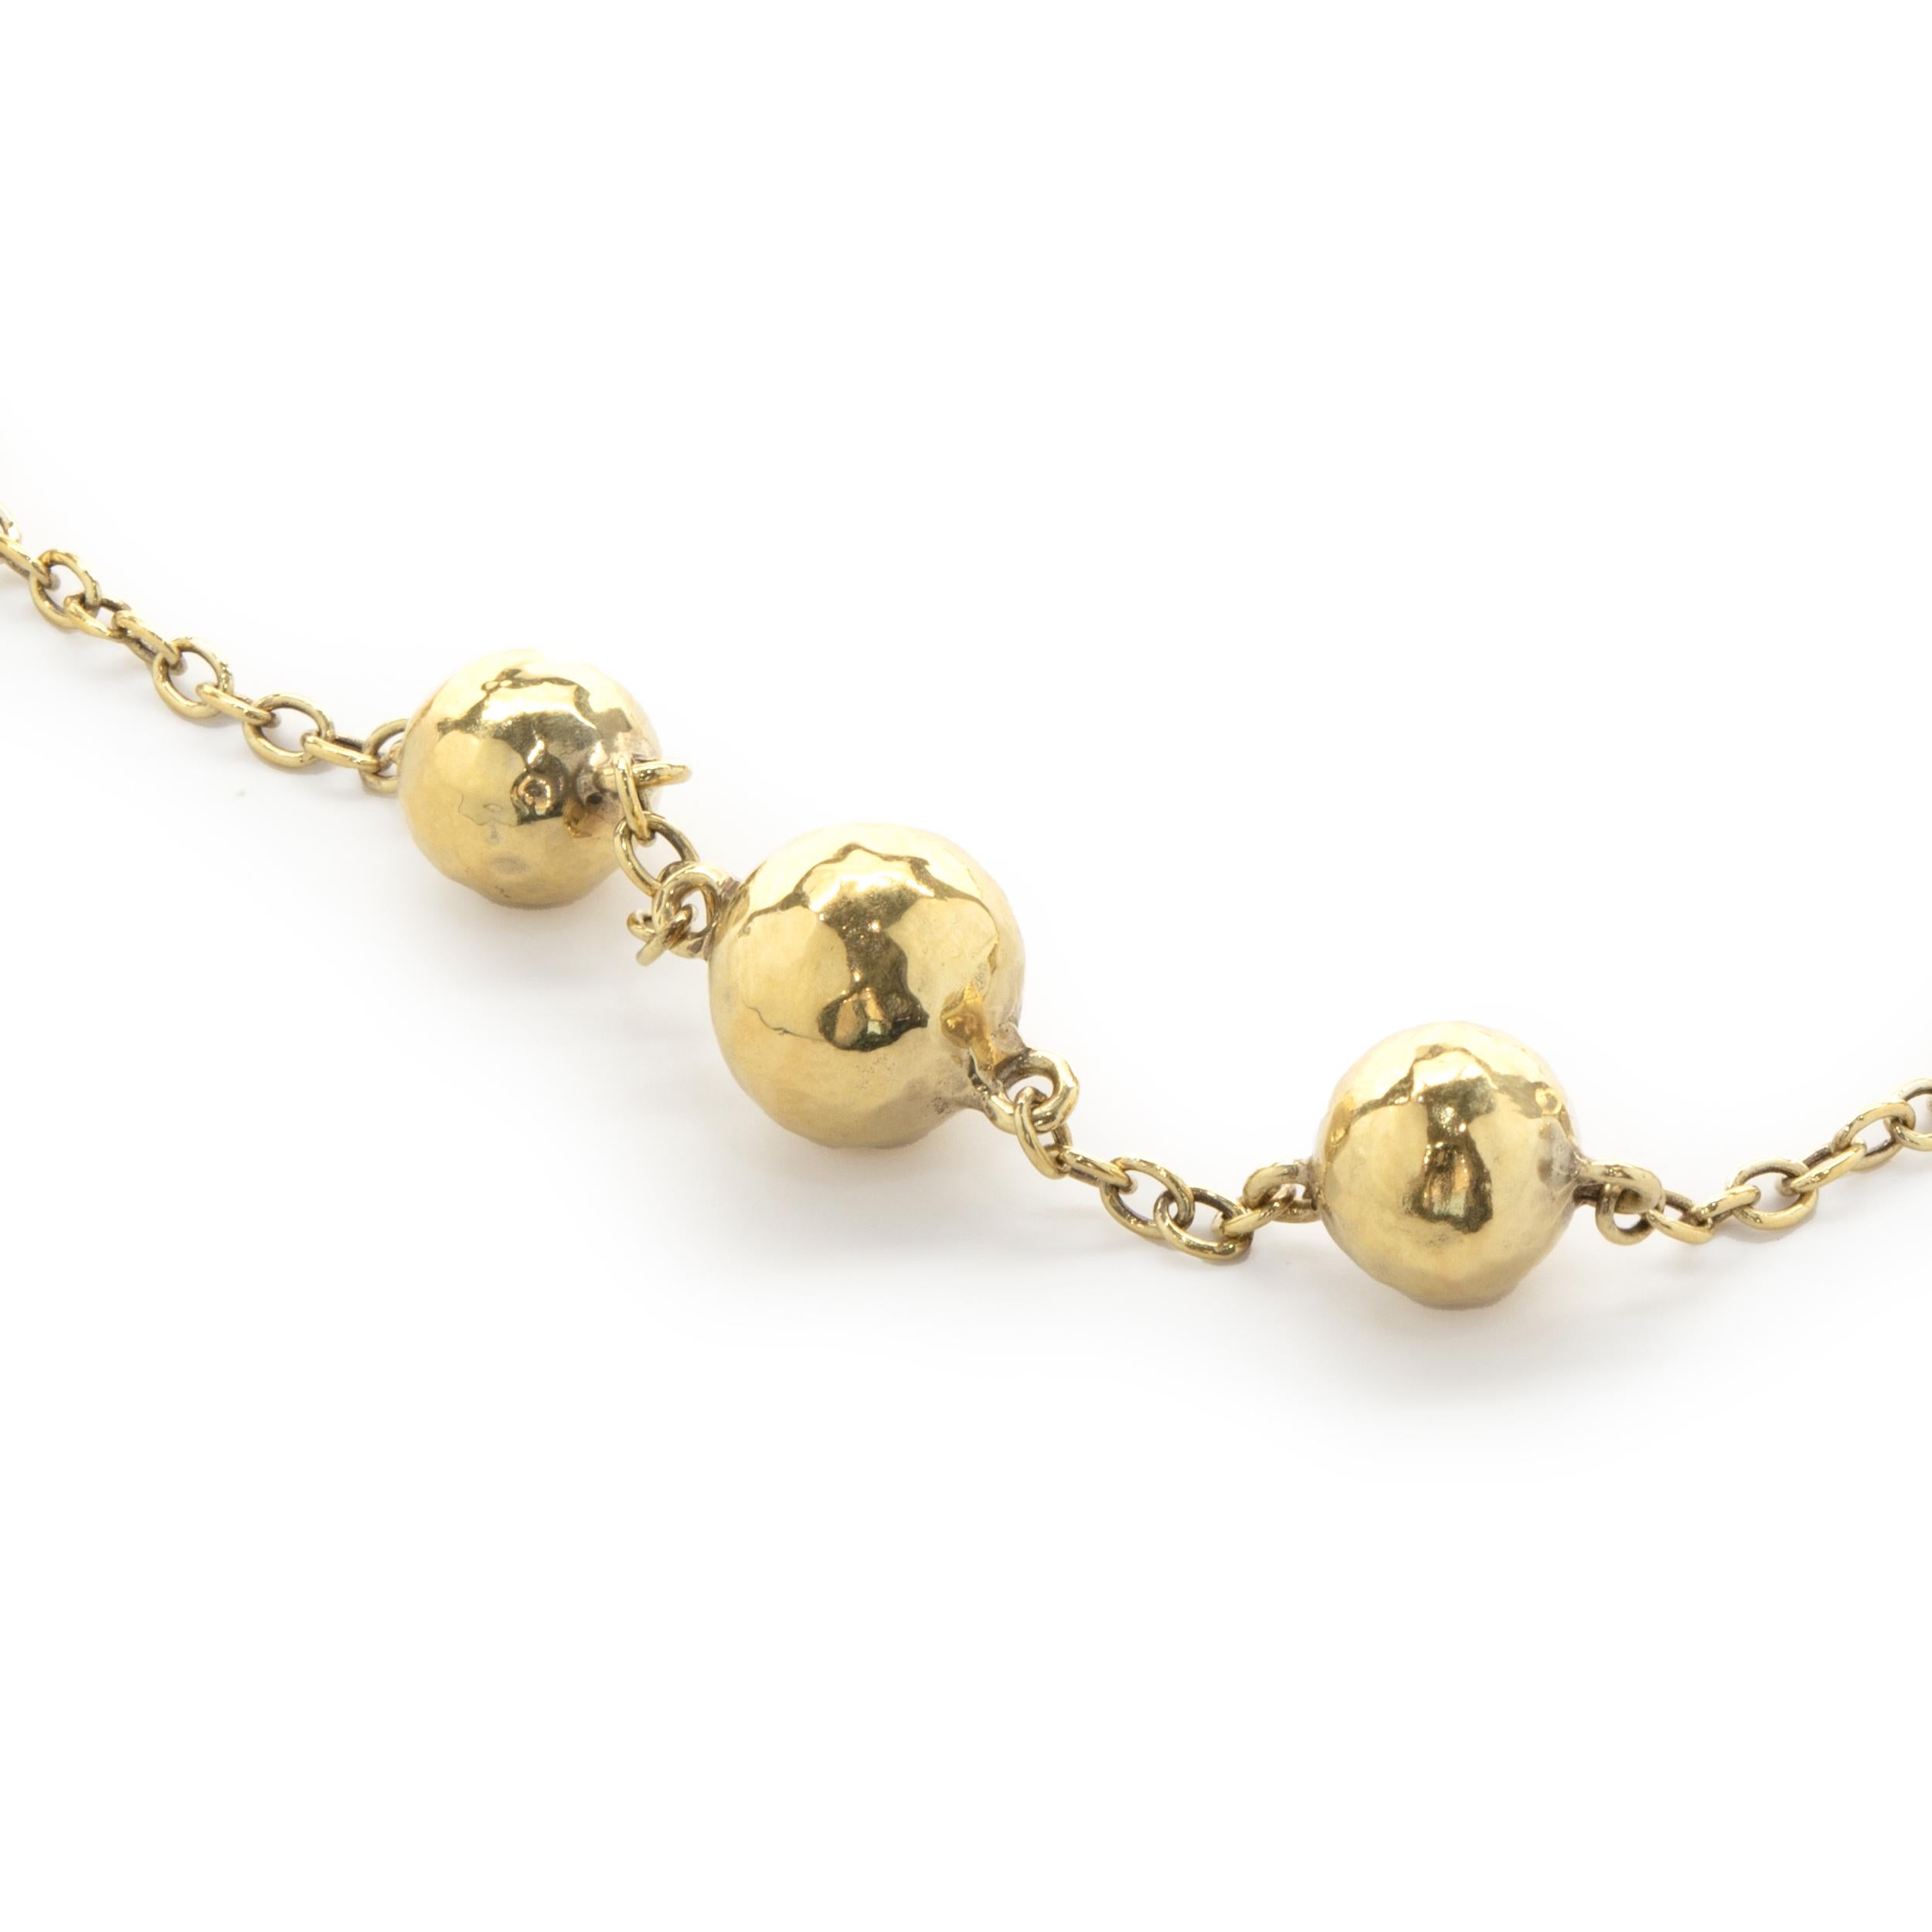 Designer: Ippolita Glamazon
Material: 18k Yellow Gold 
Dimensions: necklace measures 38 inches long
Weight: 14.86 grams
